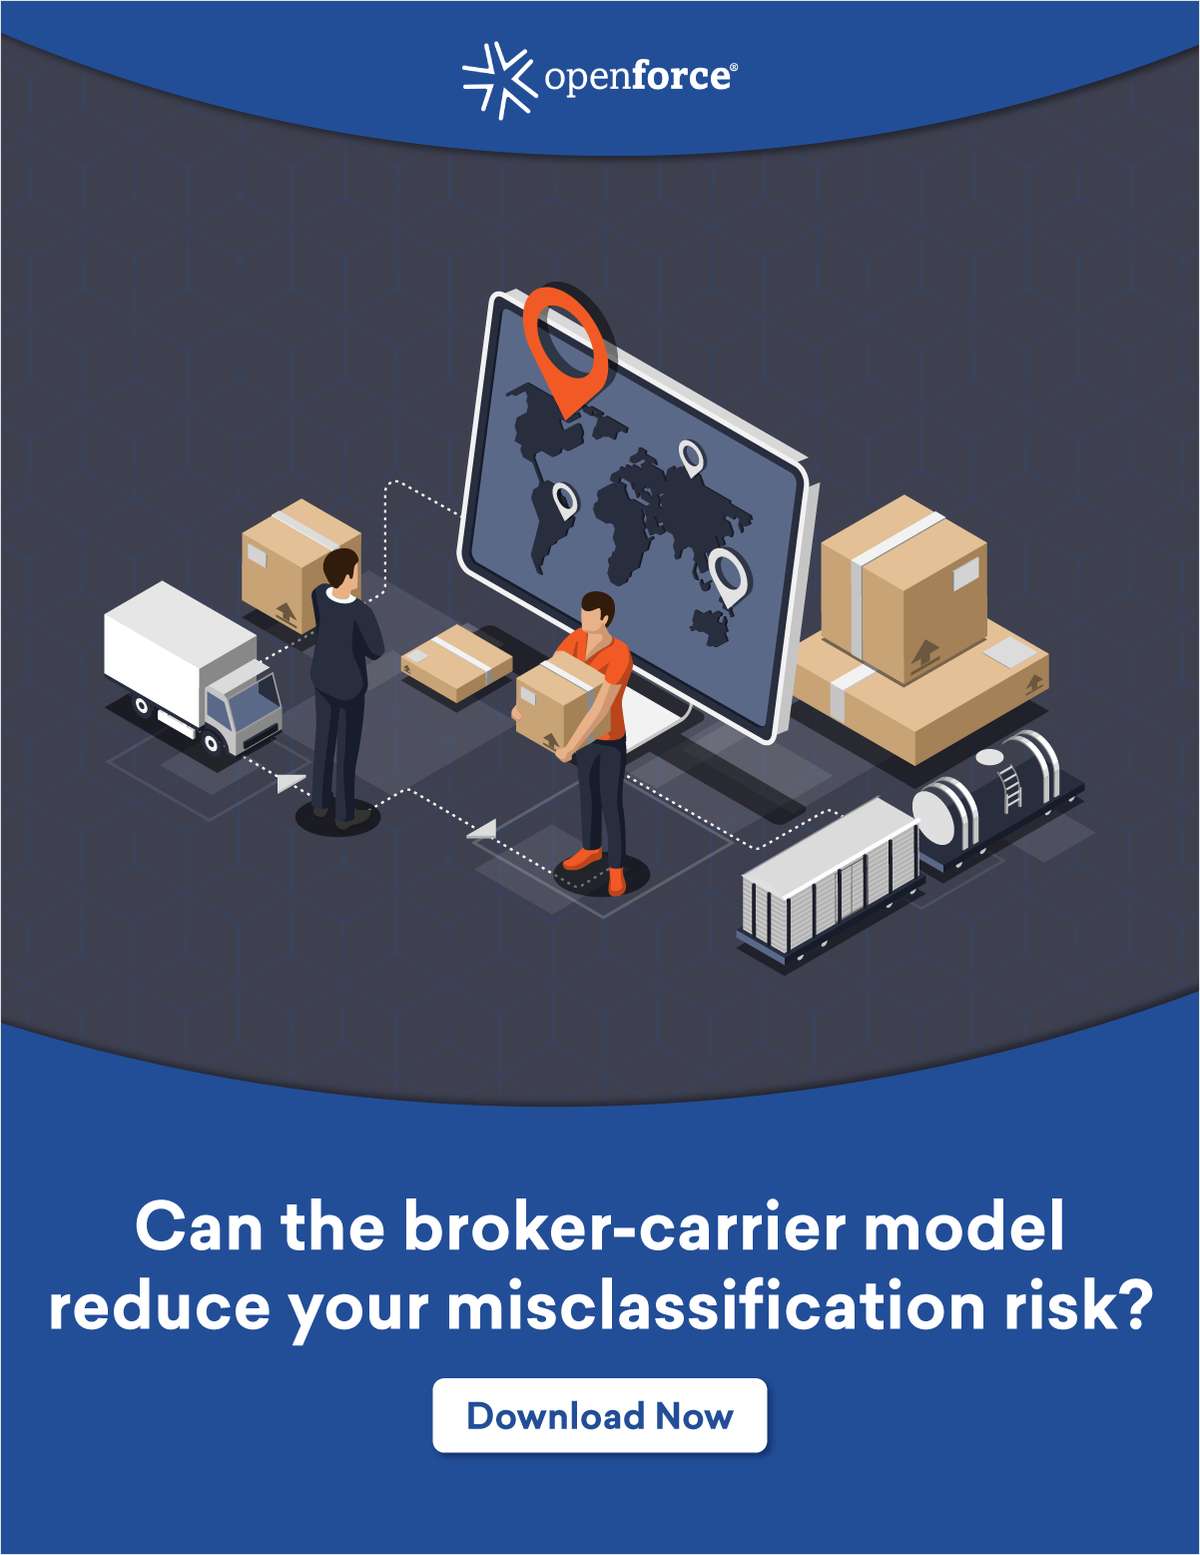 Can the Broker-Carrier Model Reduce Your Misclassification Risk?